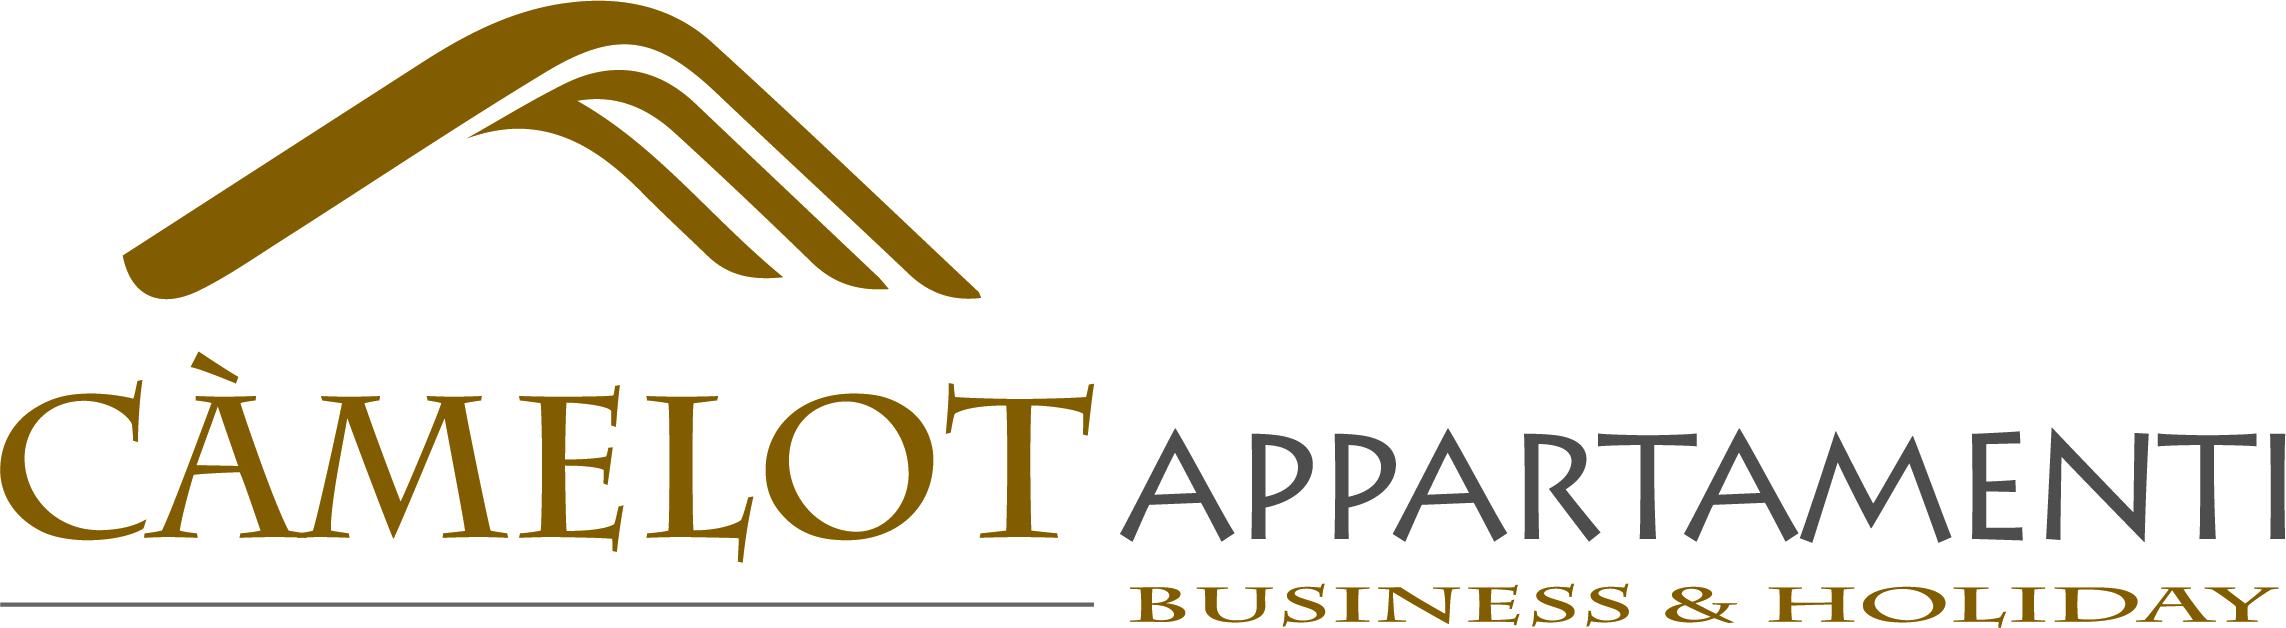 Camelot Appartamenti - Business & Holiday